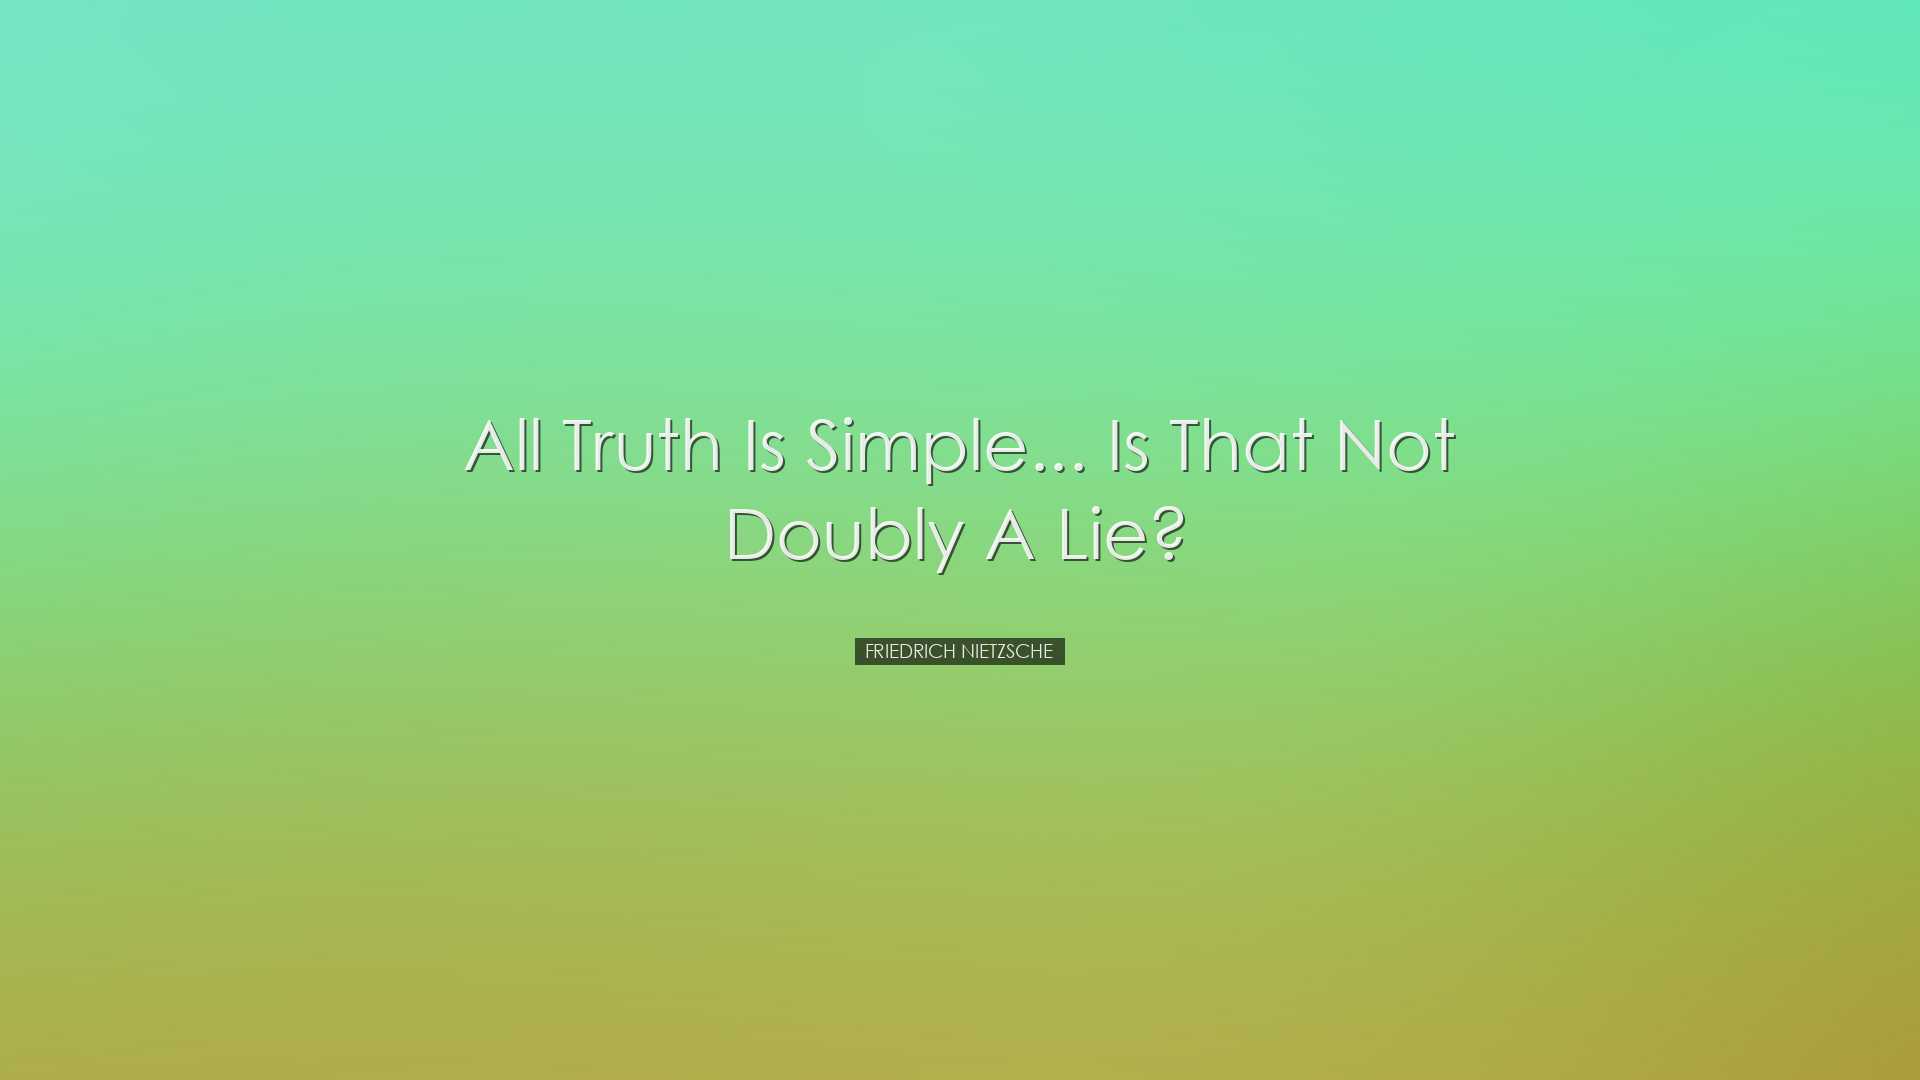 All truth is simple... is that not doubly a lie? - Friedrich Nietz